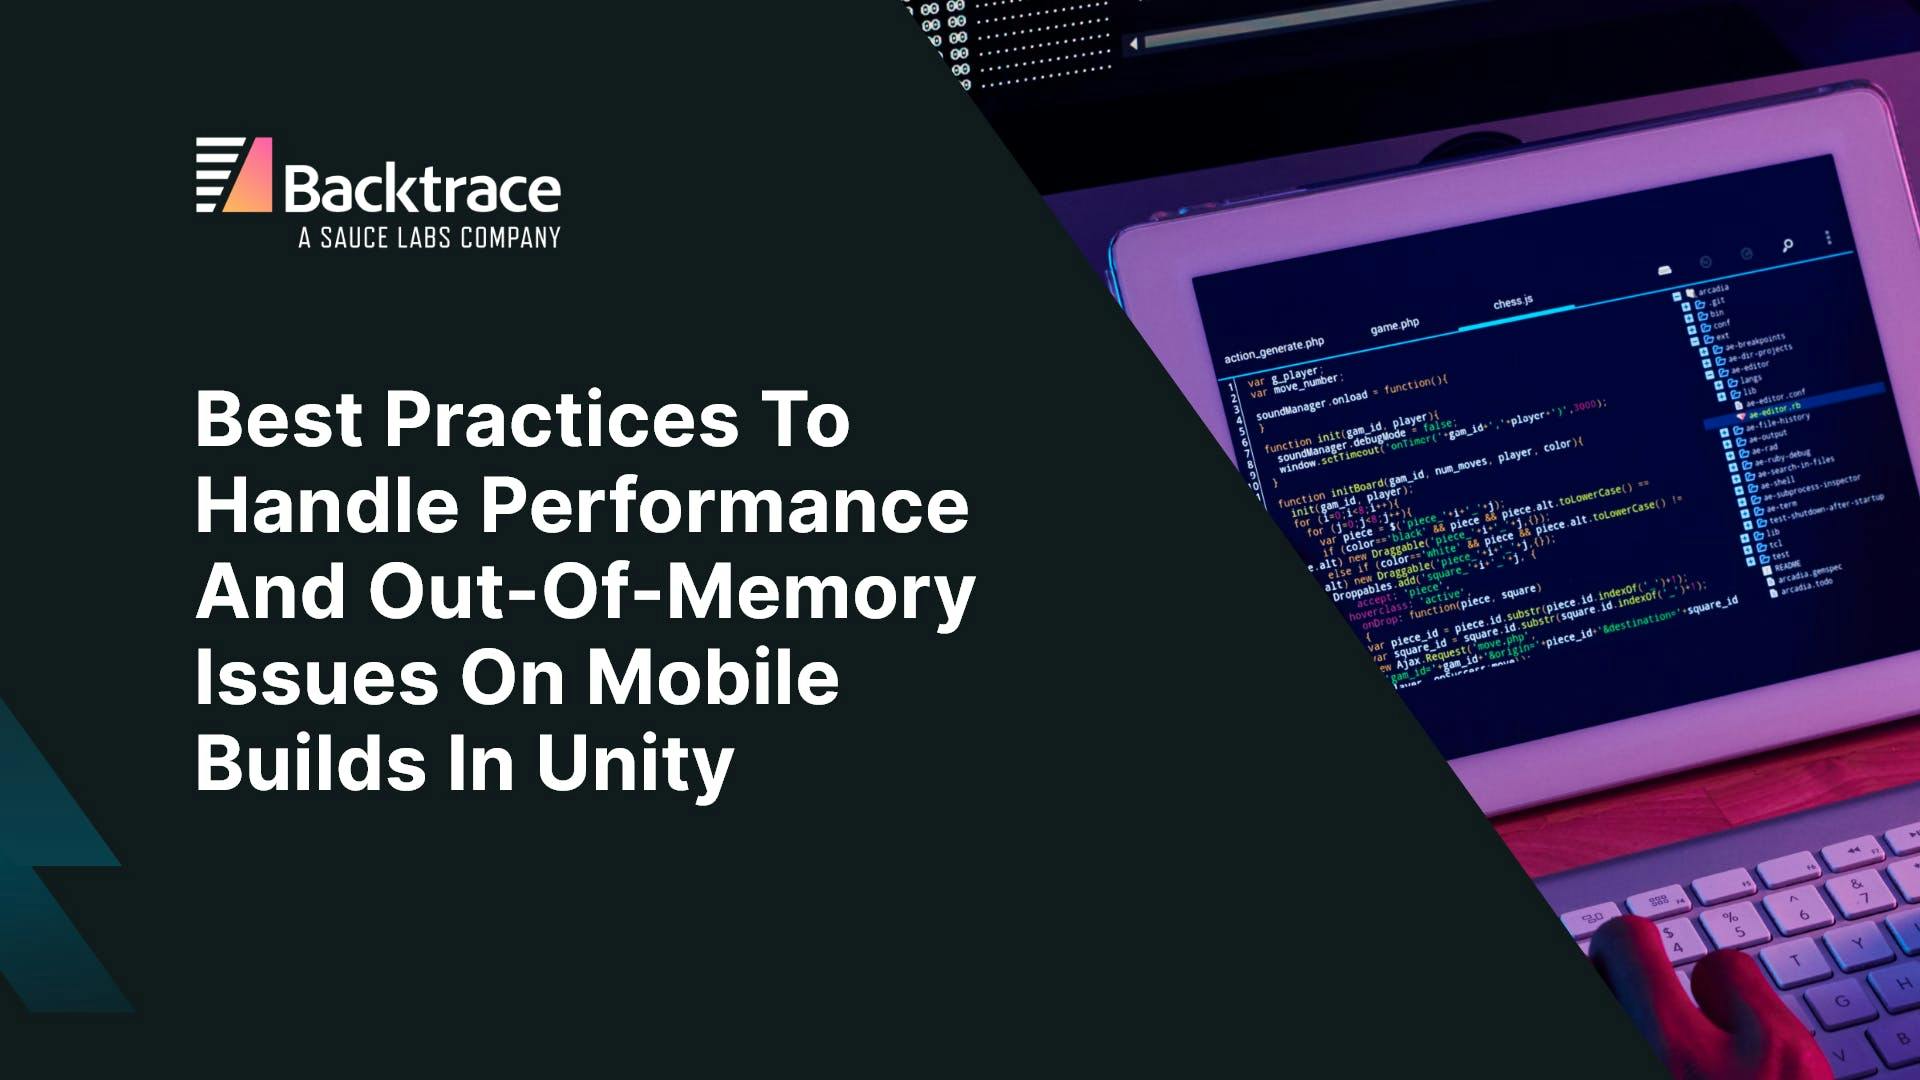 Thumbnail image for blog post: Best Practices to Handle Performance and Out-of-Memory Issues on Mobile Builds in Unity